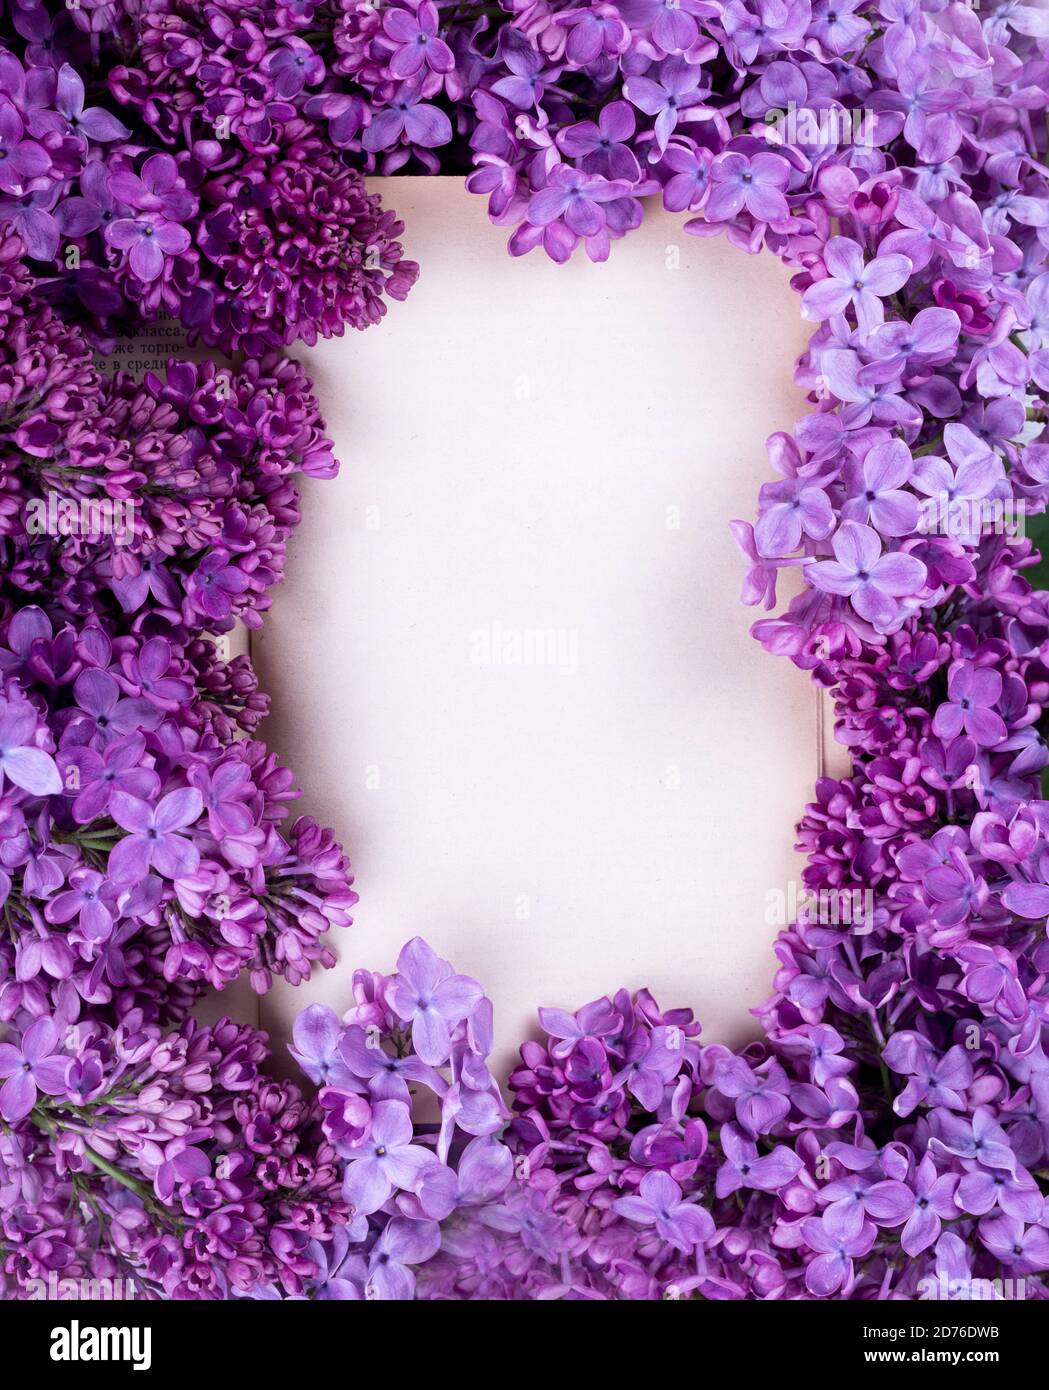 Floral border of Beautiful purple lilac flowers on a white background.  Macro photo of lilac spring flowers. Floral background Stock Photo - Alamy